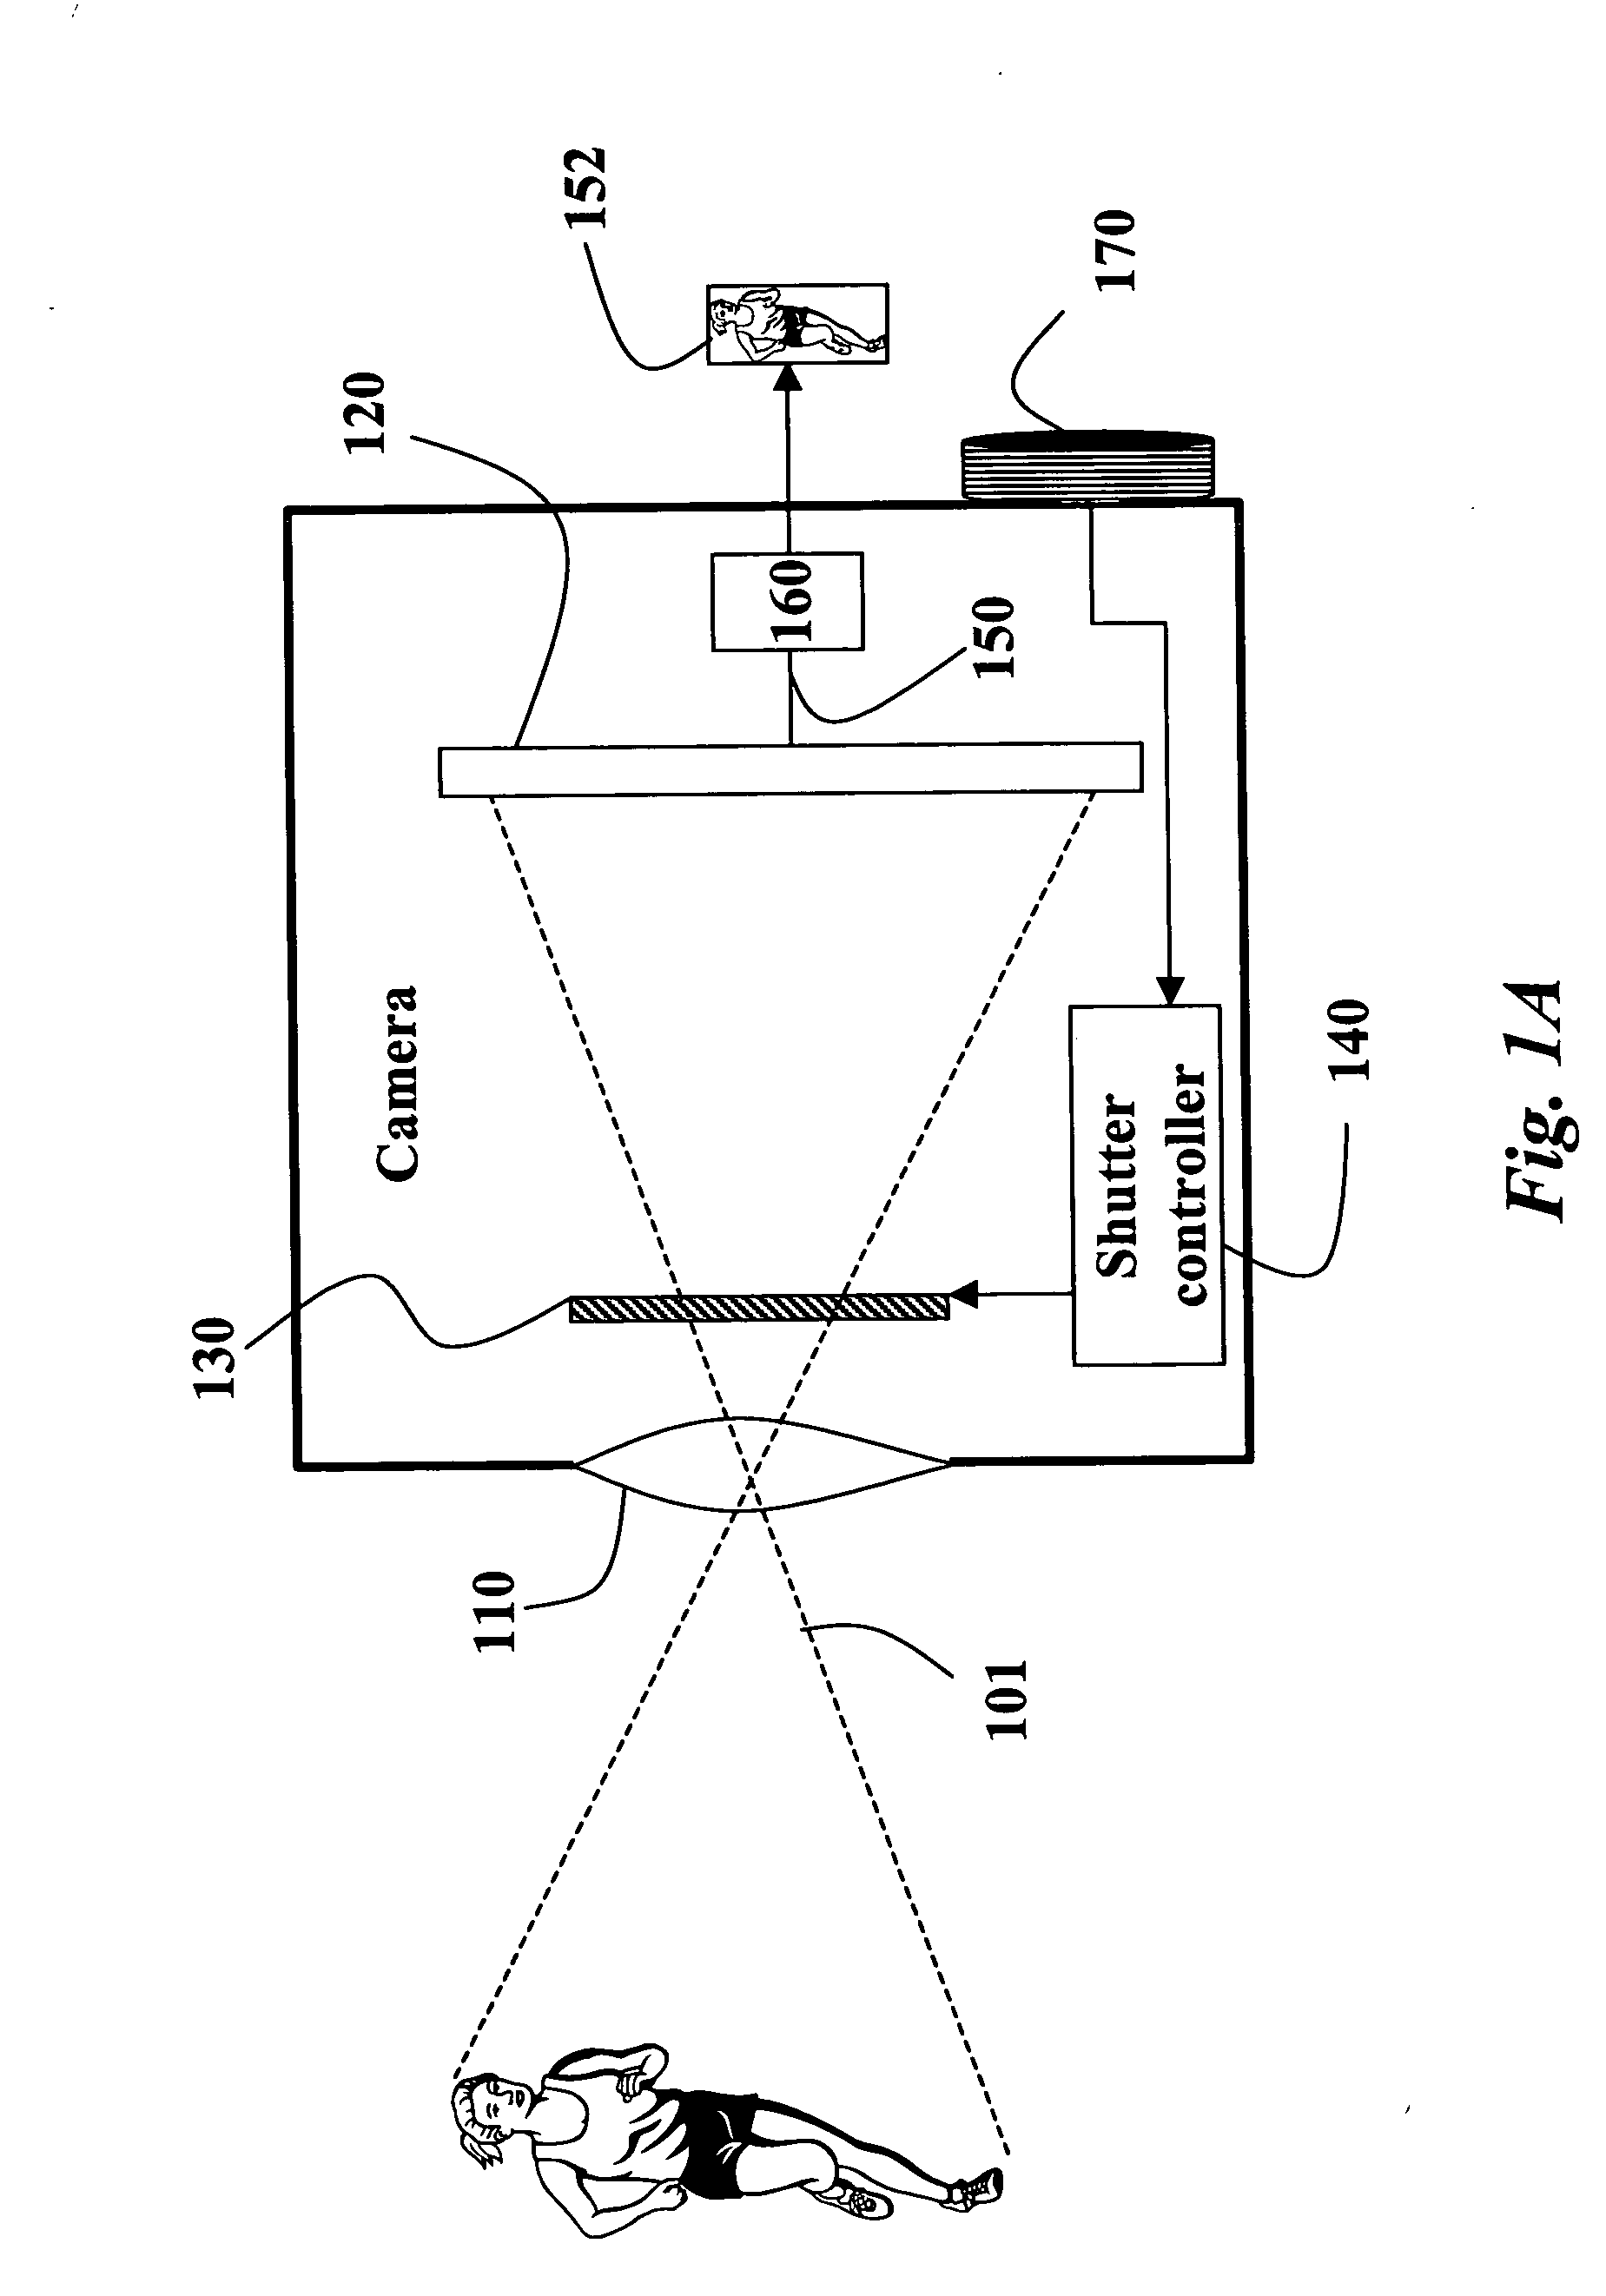 Method and apparatus for deblurring images